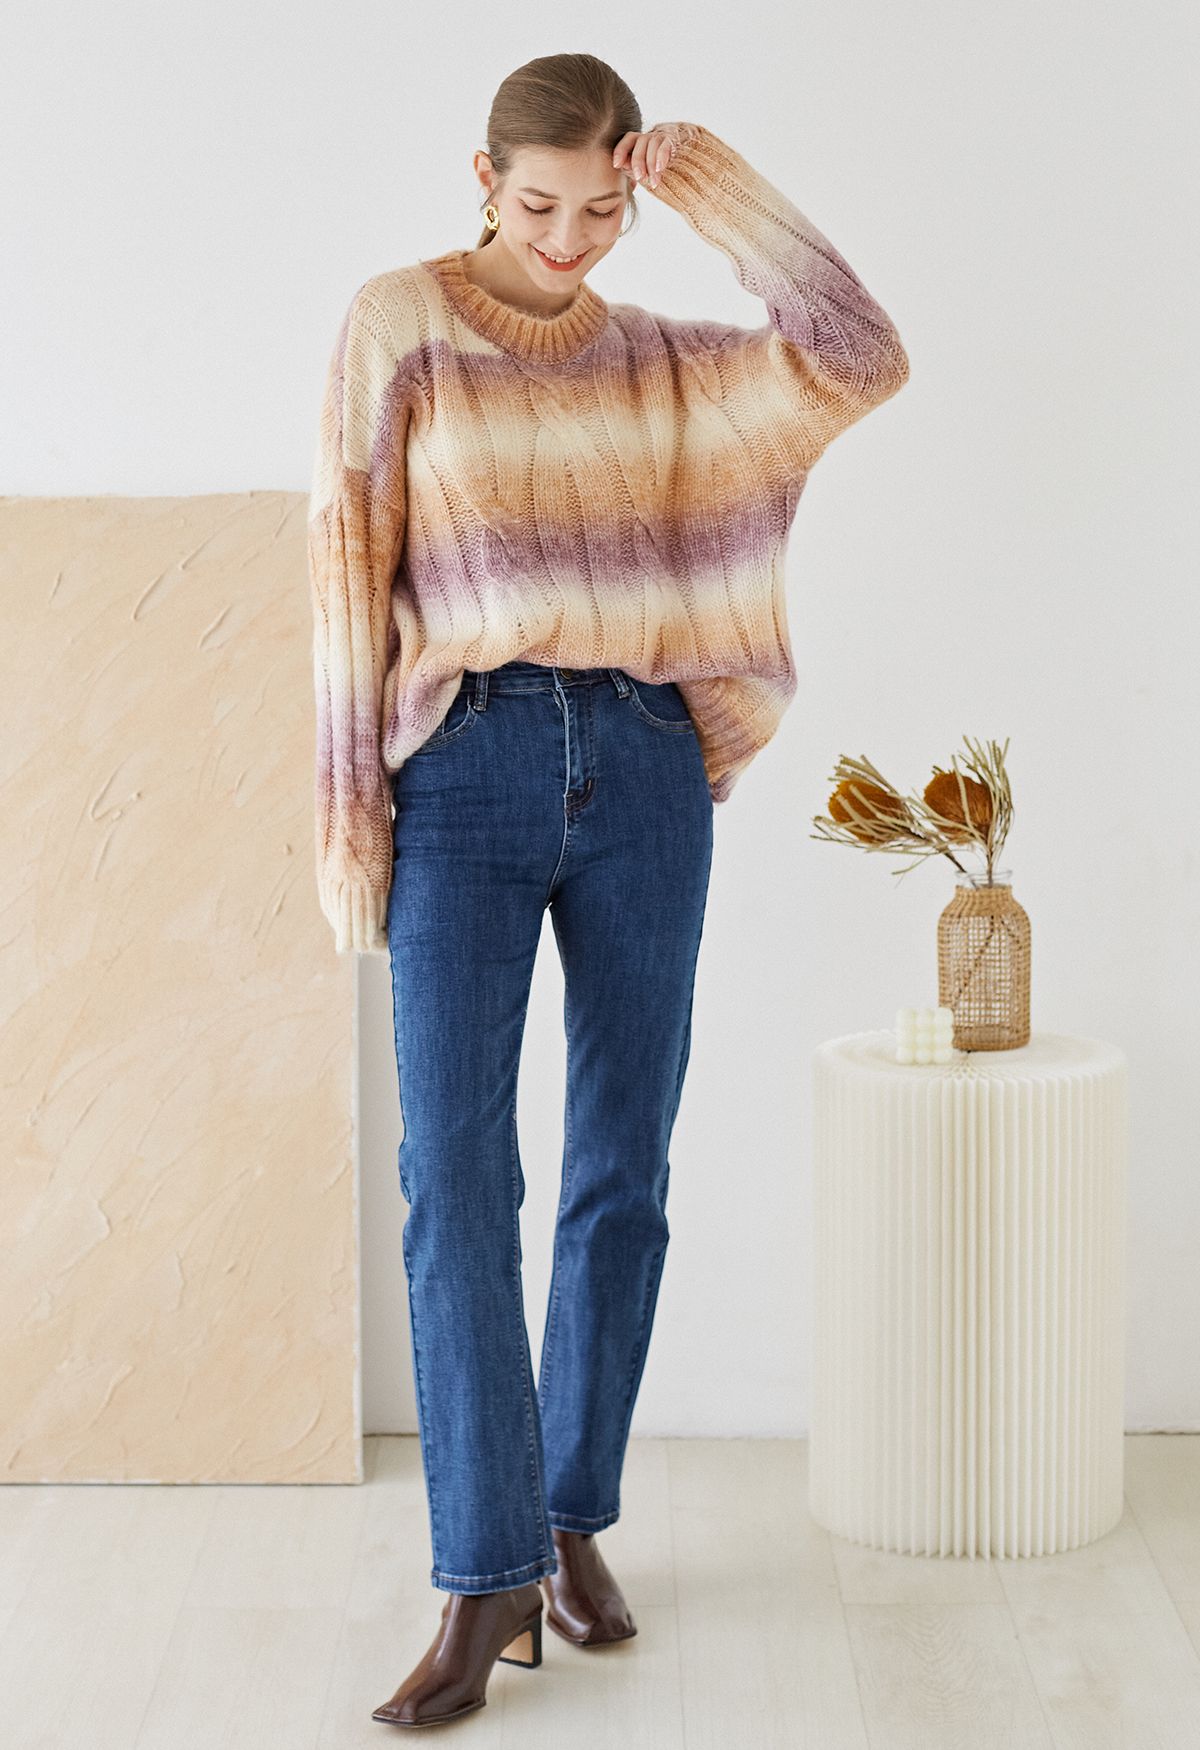 Ombre Braided Knit Round Neck Sweater